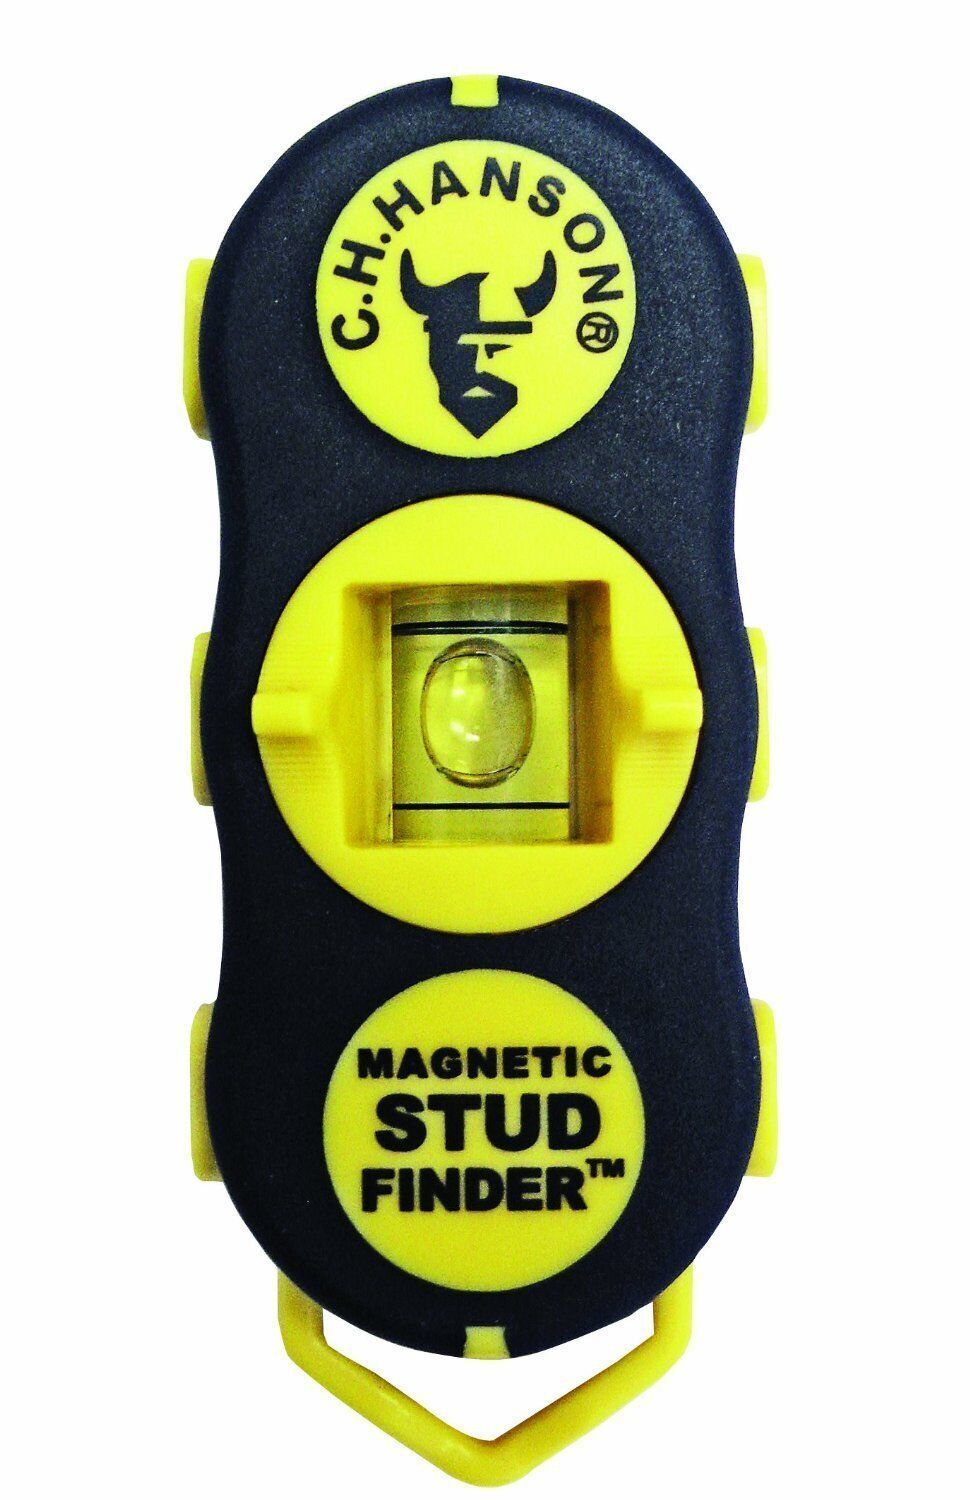 Magnetic Stud Finder Studs Behind Drywall Sheetrock Rotating Bubble Vial Locate - $12.82